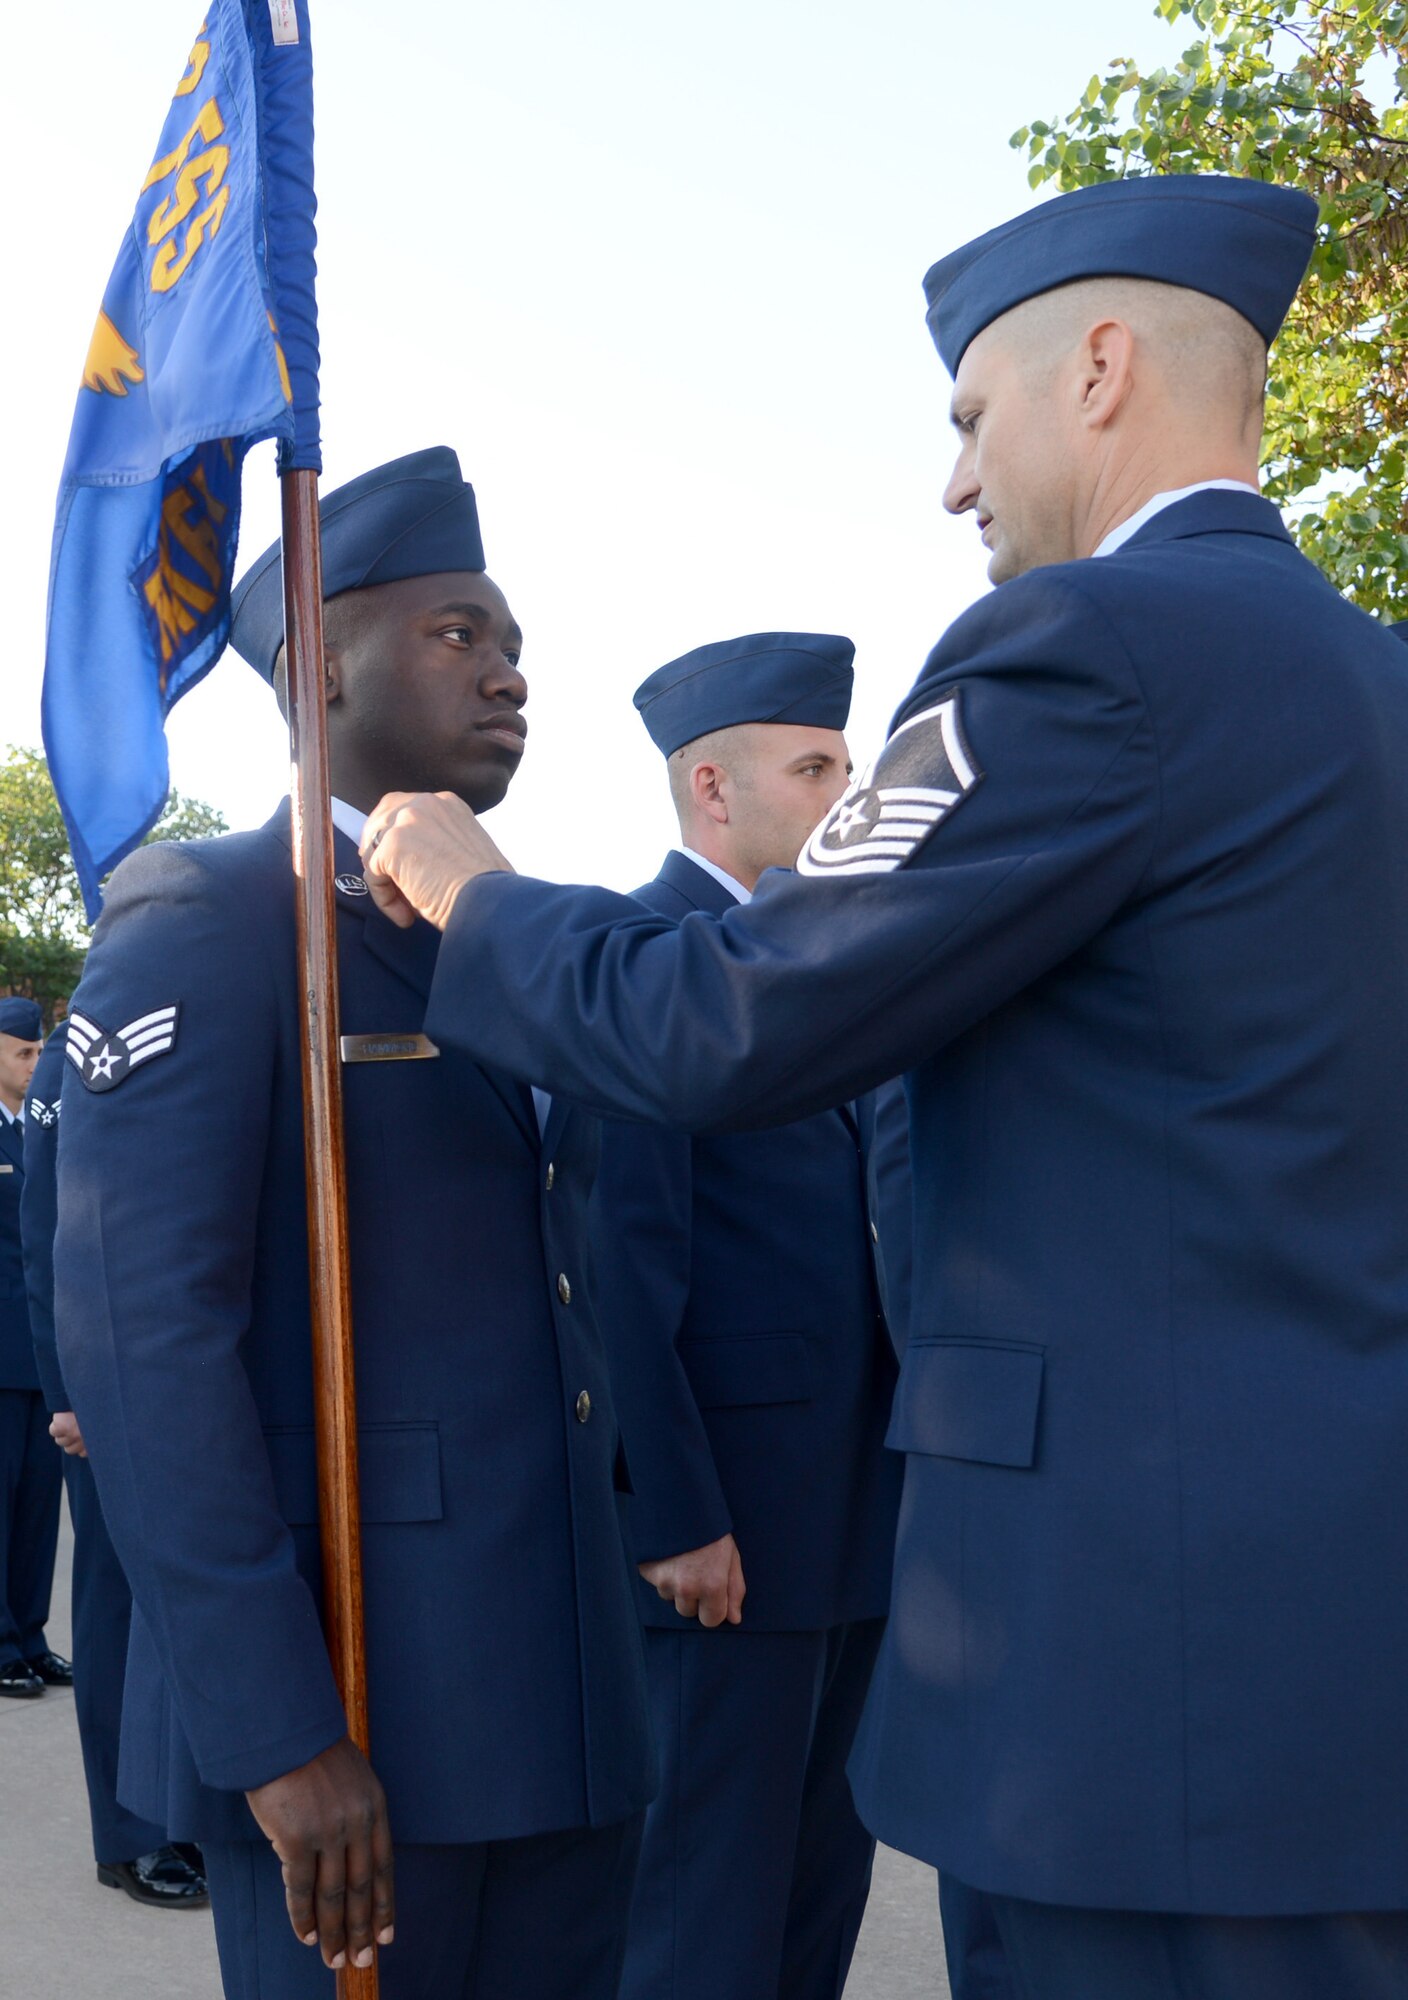 Master Sgt. Bobby Kazmir, Airman Leadership School commandant, inspects the service dress uniform of Senior Airman Malek, with the 552nd Maintenance Squadron. Sergeant Kazmir conducts three uniform inspections during each five-week course for each uniform: ABU’s, service uniform and service dress uniform. As part of their Customs and Courtesies curriculum, the inspections help the students take pride in their uniform and understand the importance of it. (Air Force photo by Kelly White)